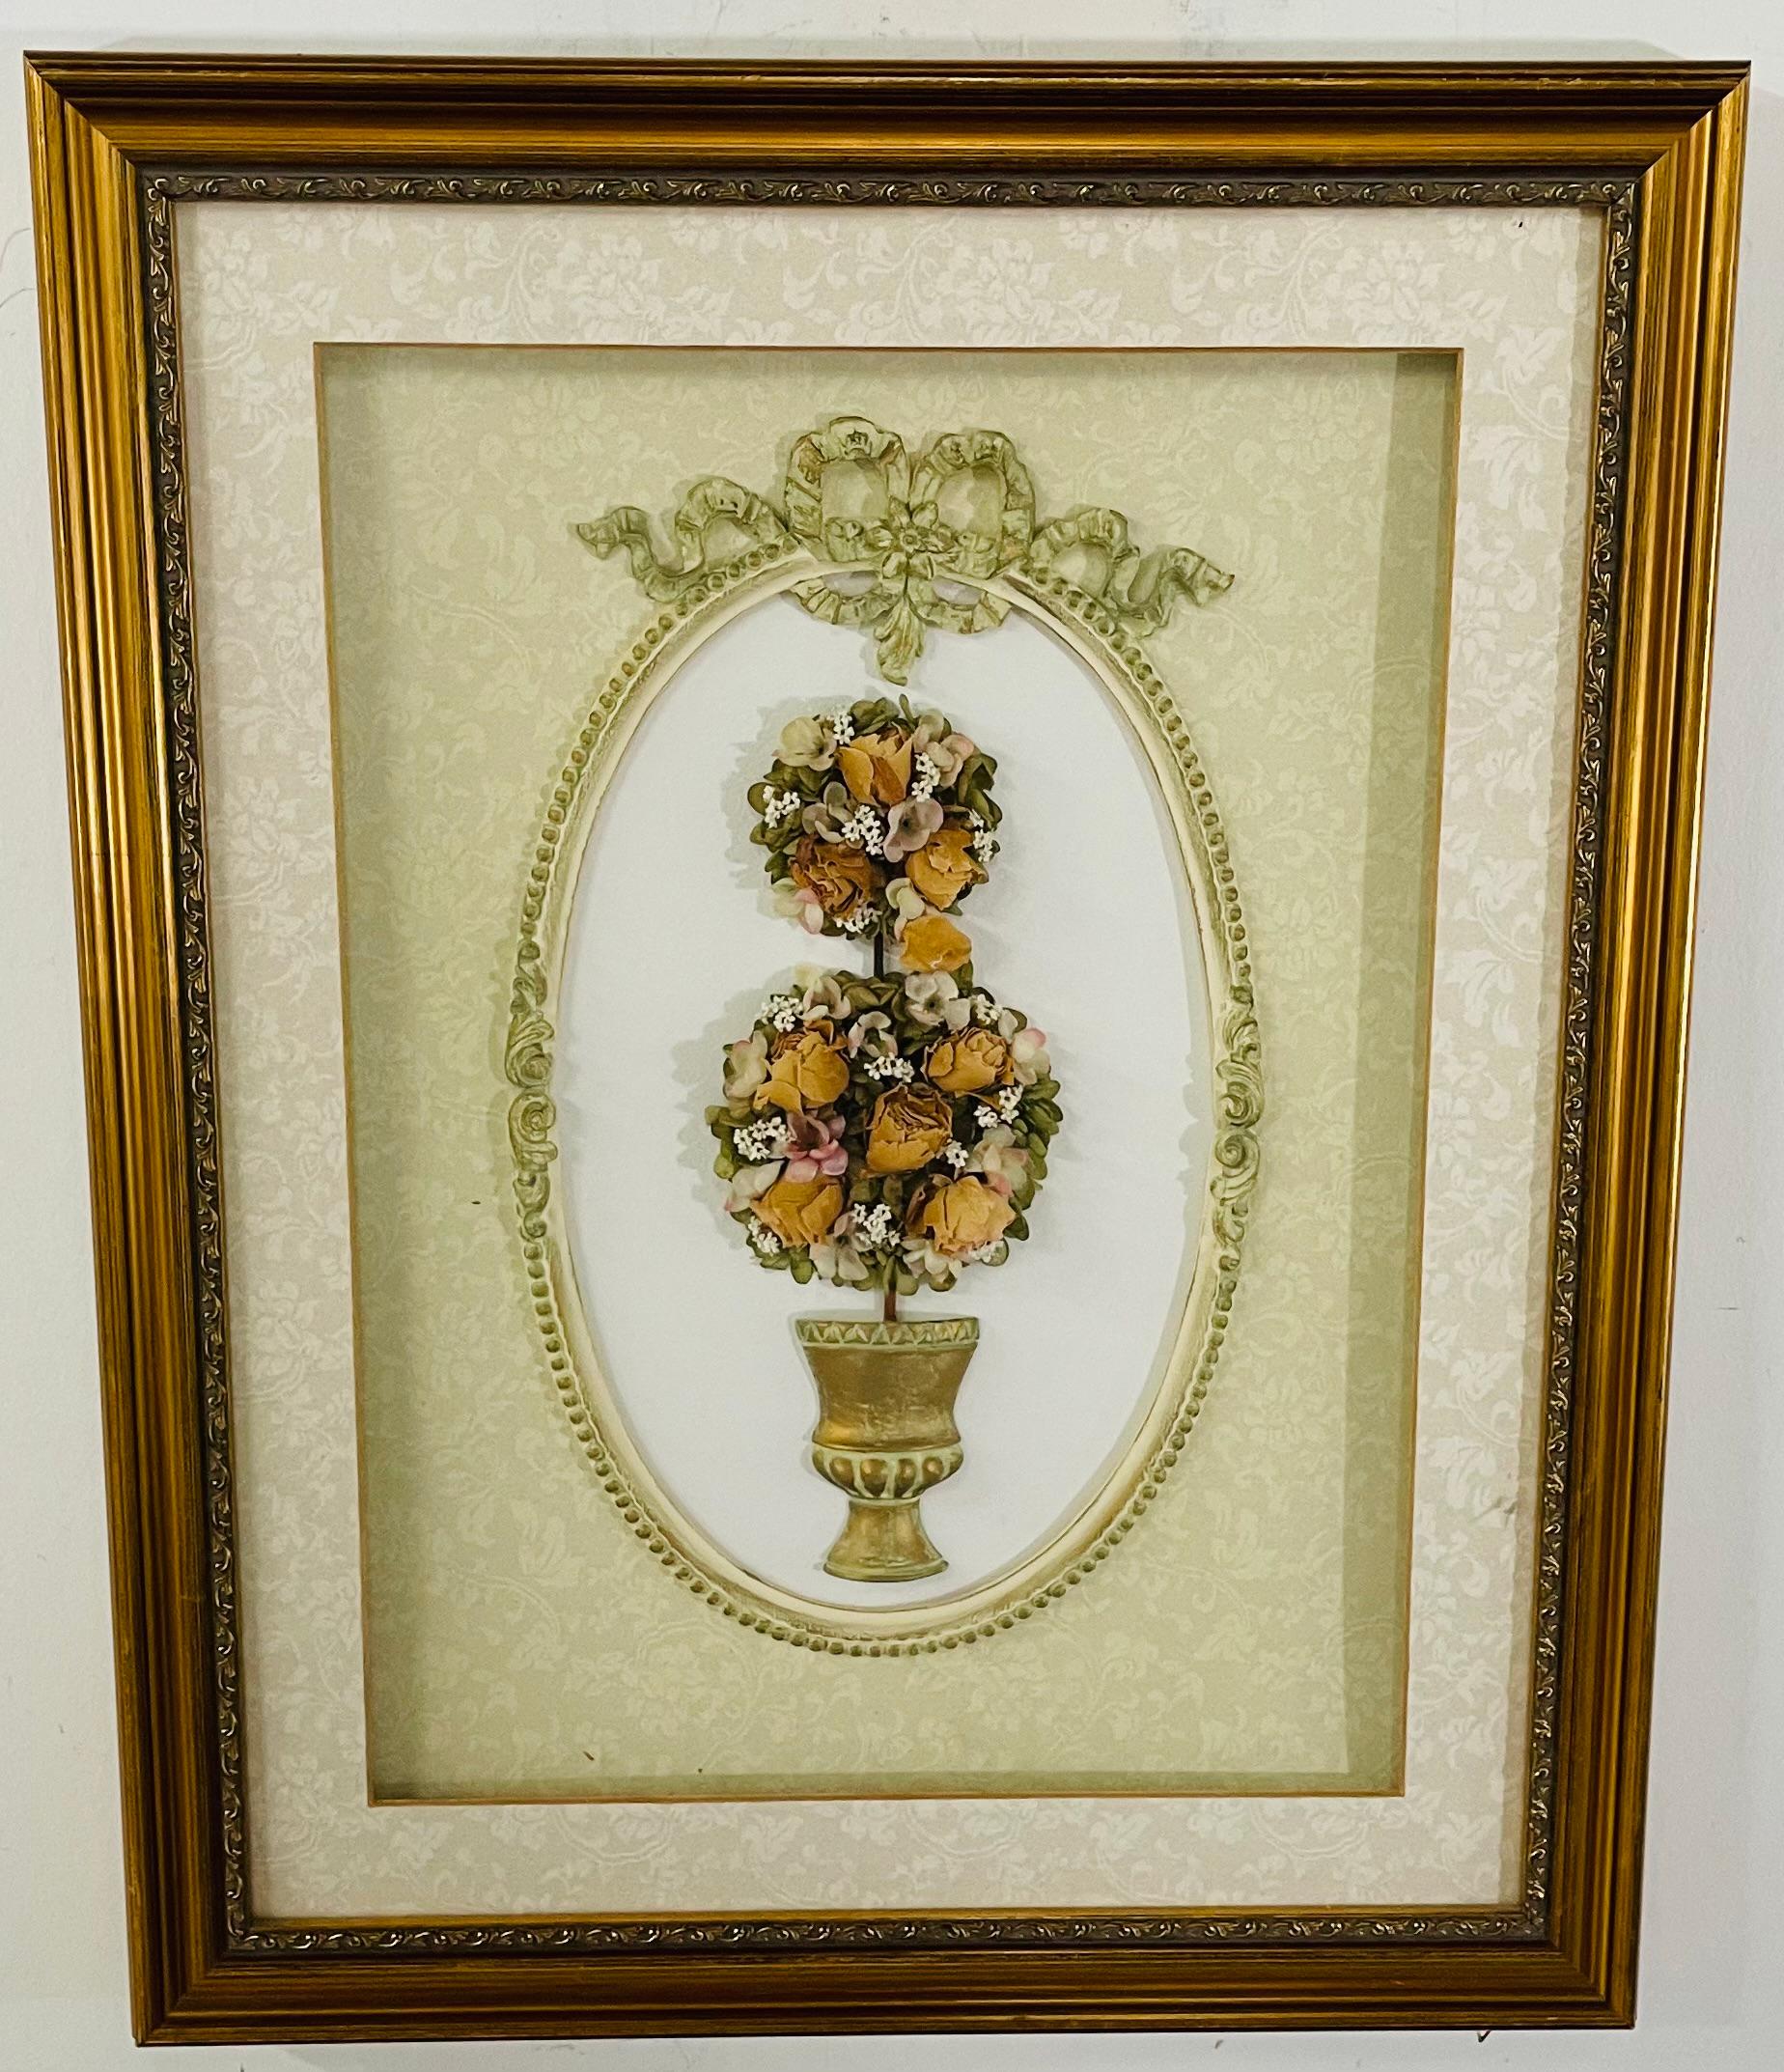 French Provincial French Style Flowers in a Vase Wall Art